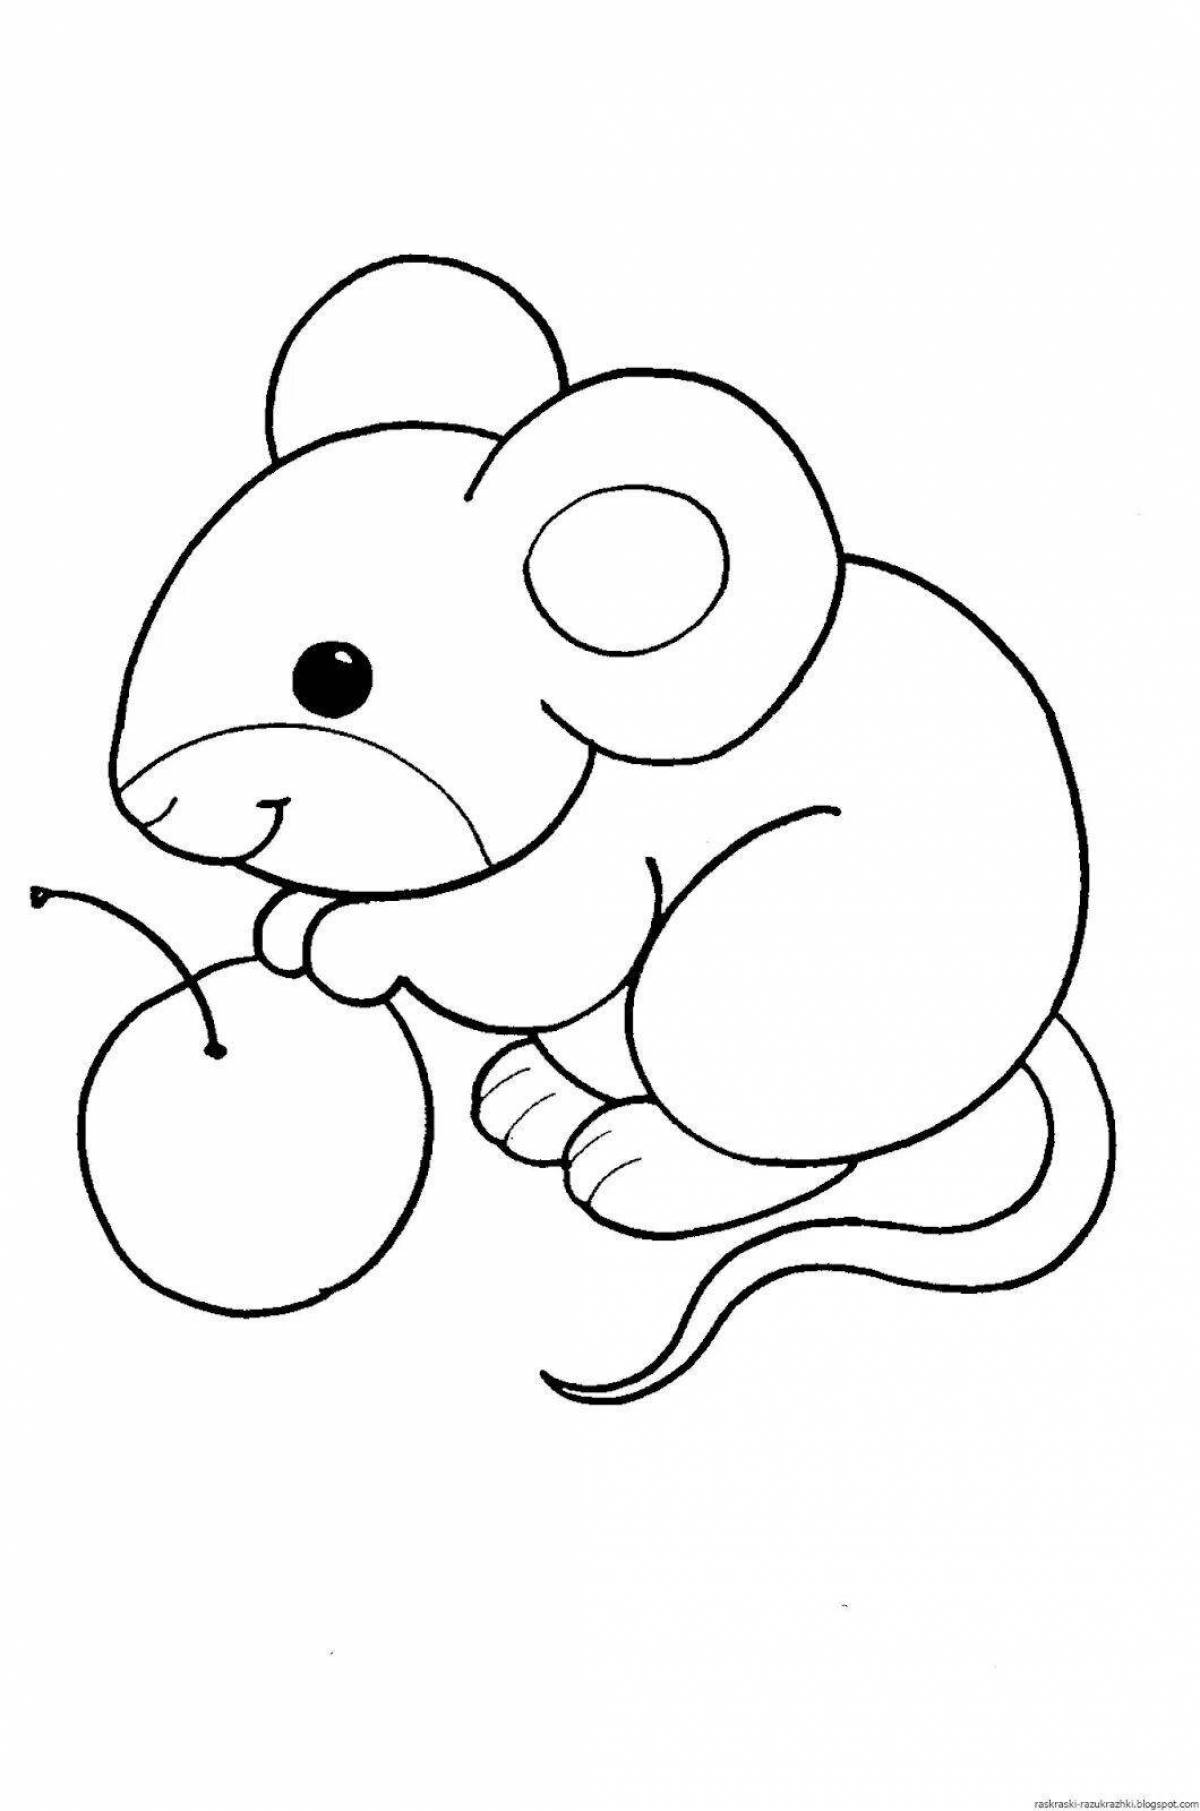 Color-explosion mouse coloring page for kids